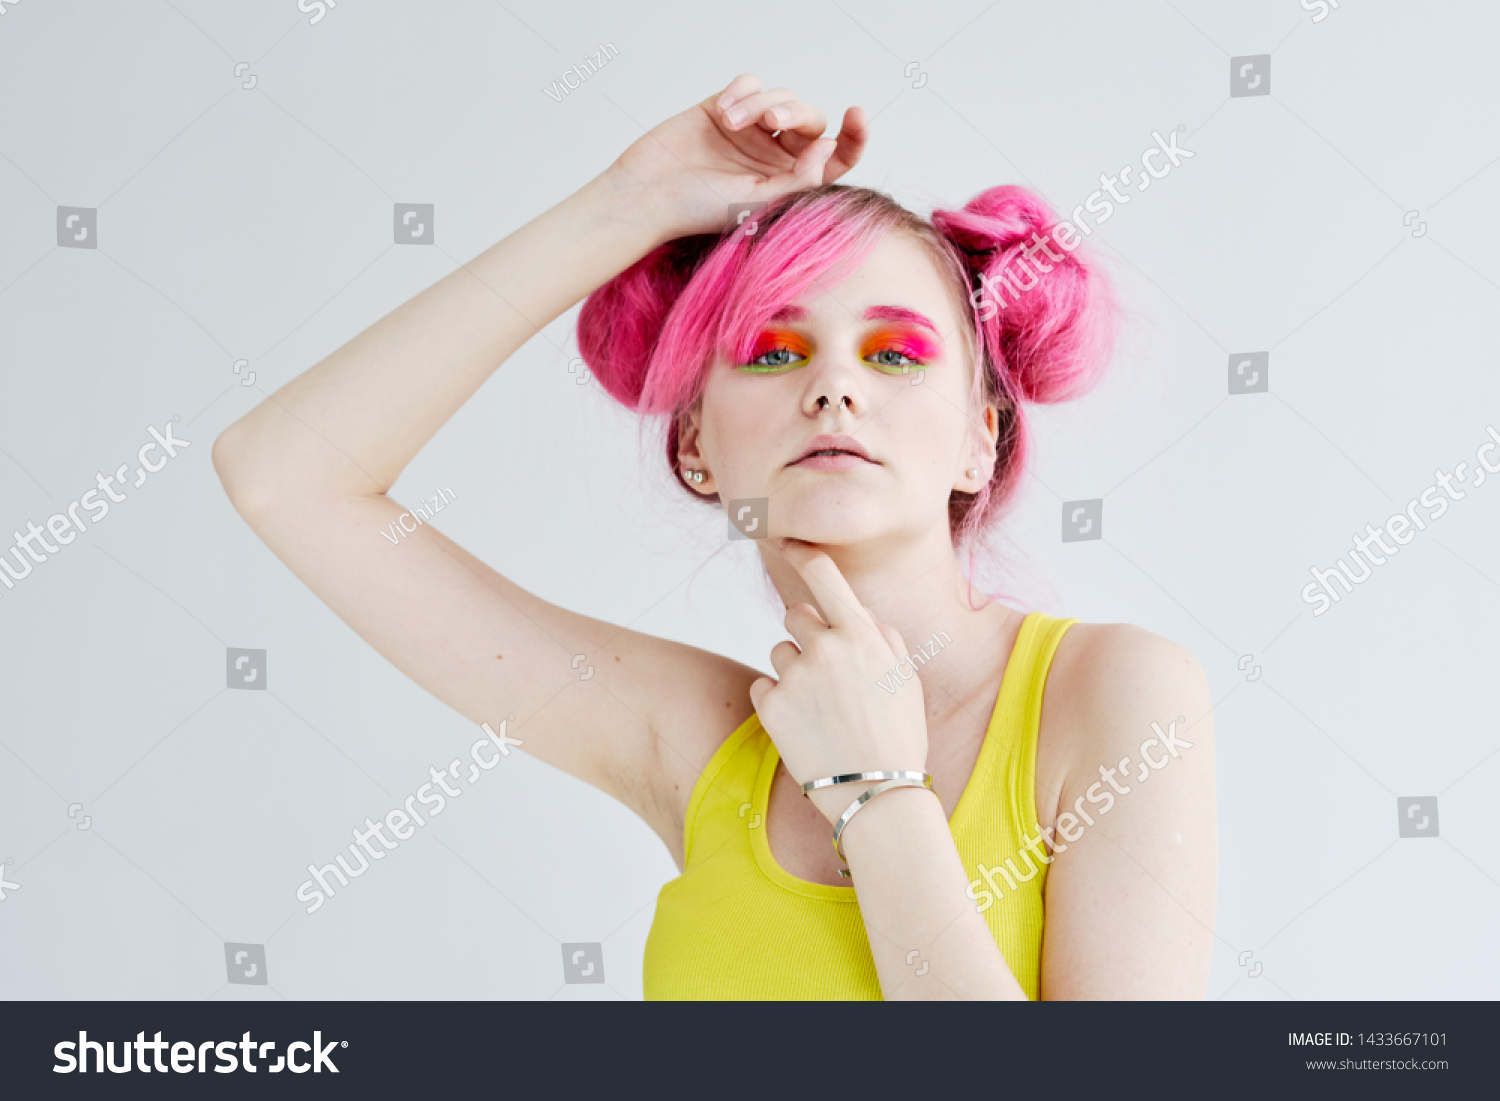 woman with pink hair on a light background #1433667101